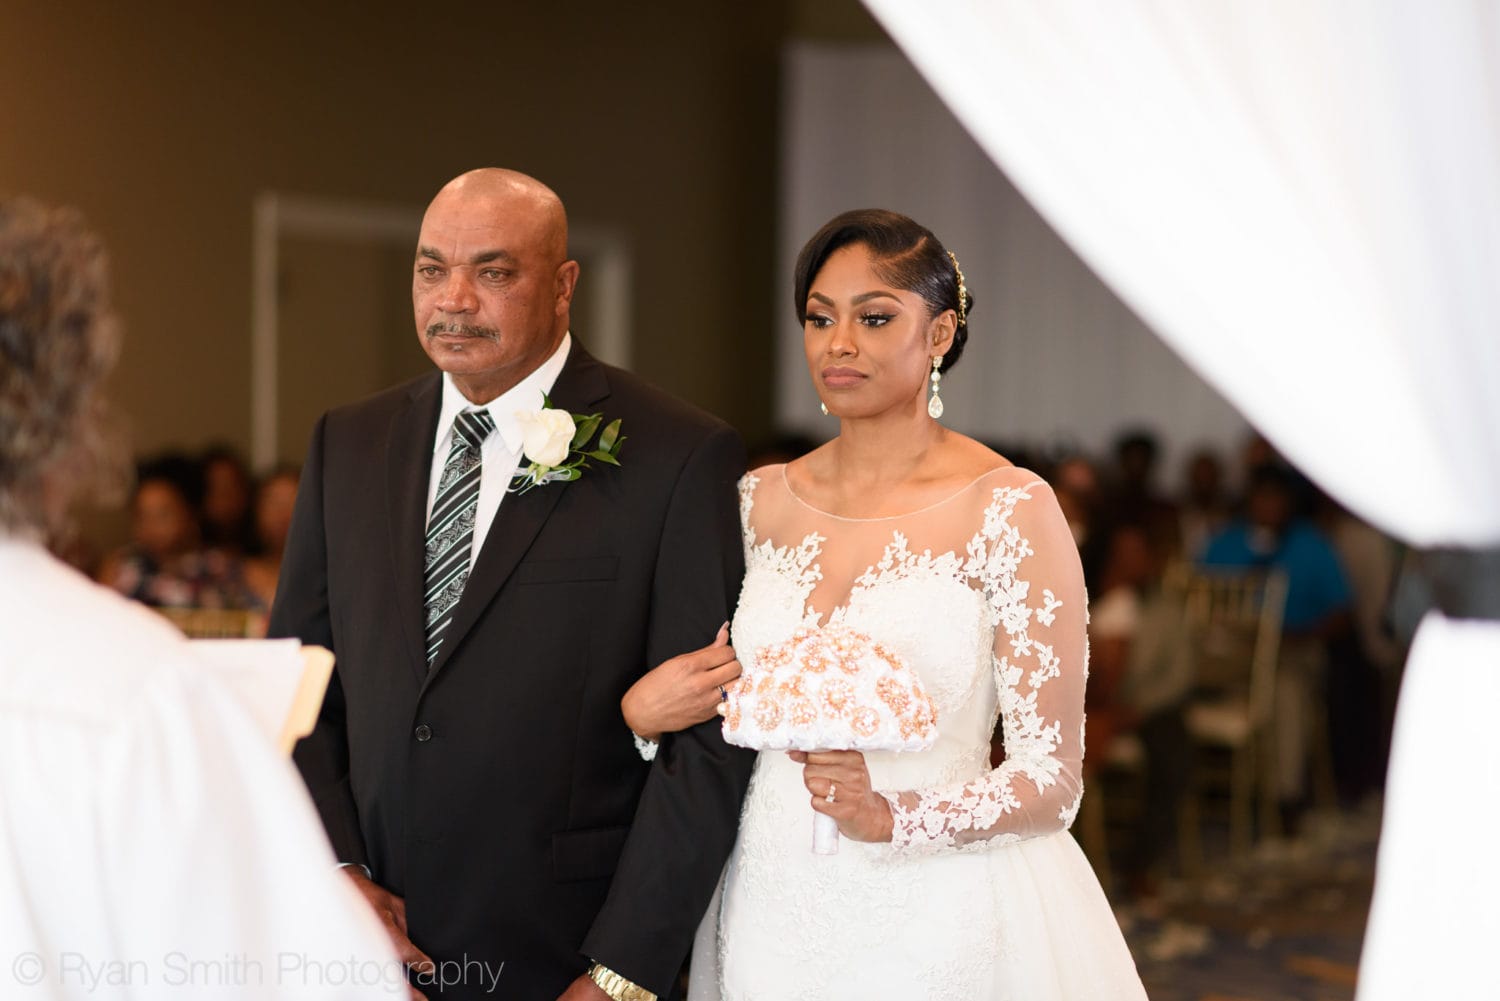 Bride and father during ceremony - Doubletree Resort by Hilton Myrtle Beach